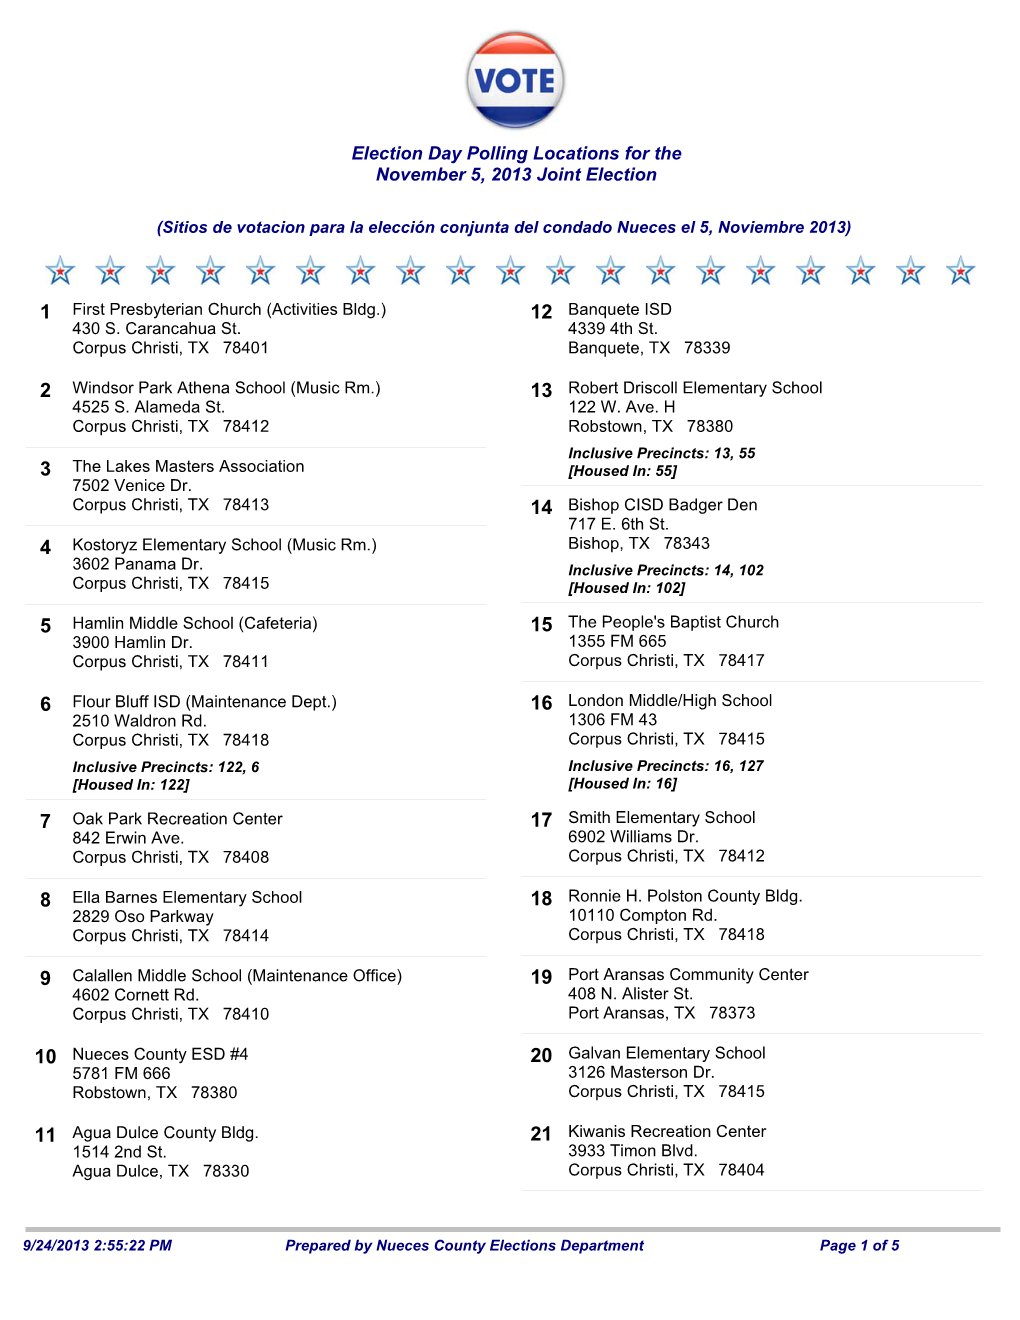 Election Day Polling Locations for the November 5, 2013 Joint Election